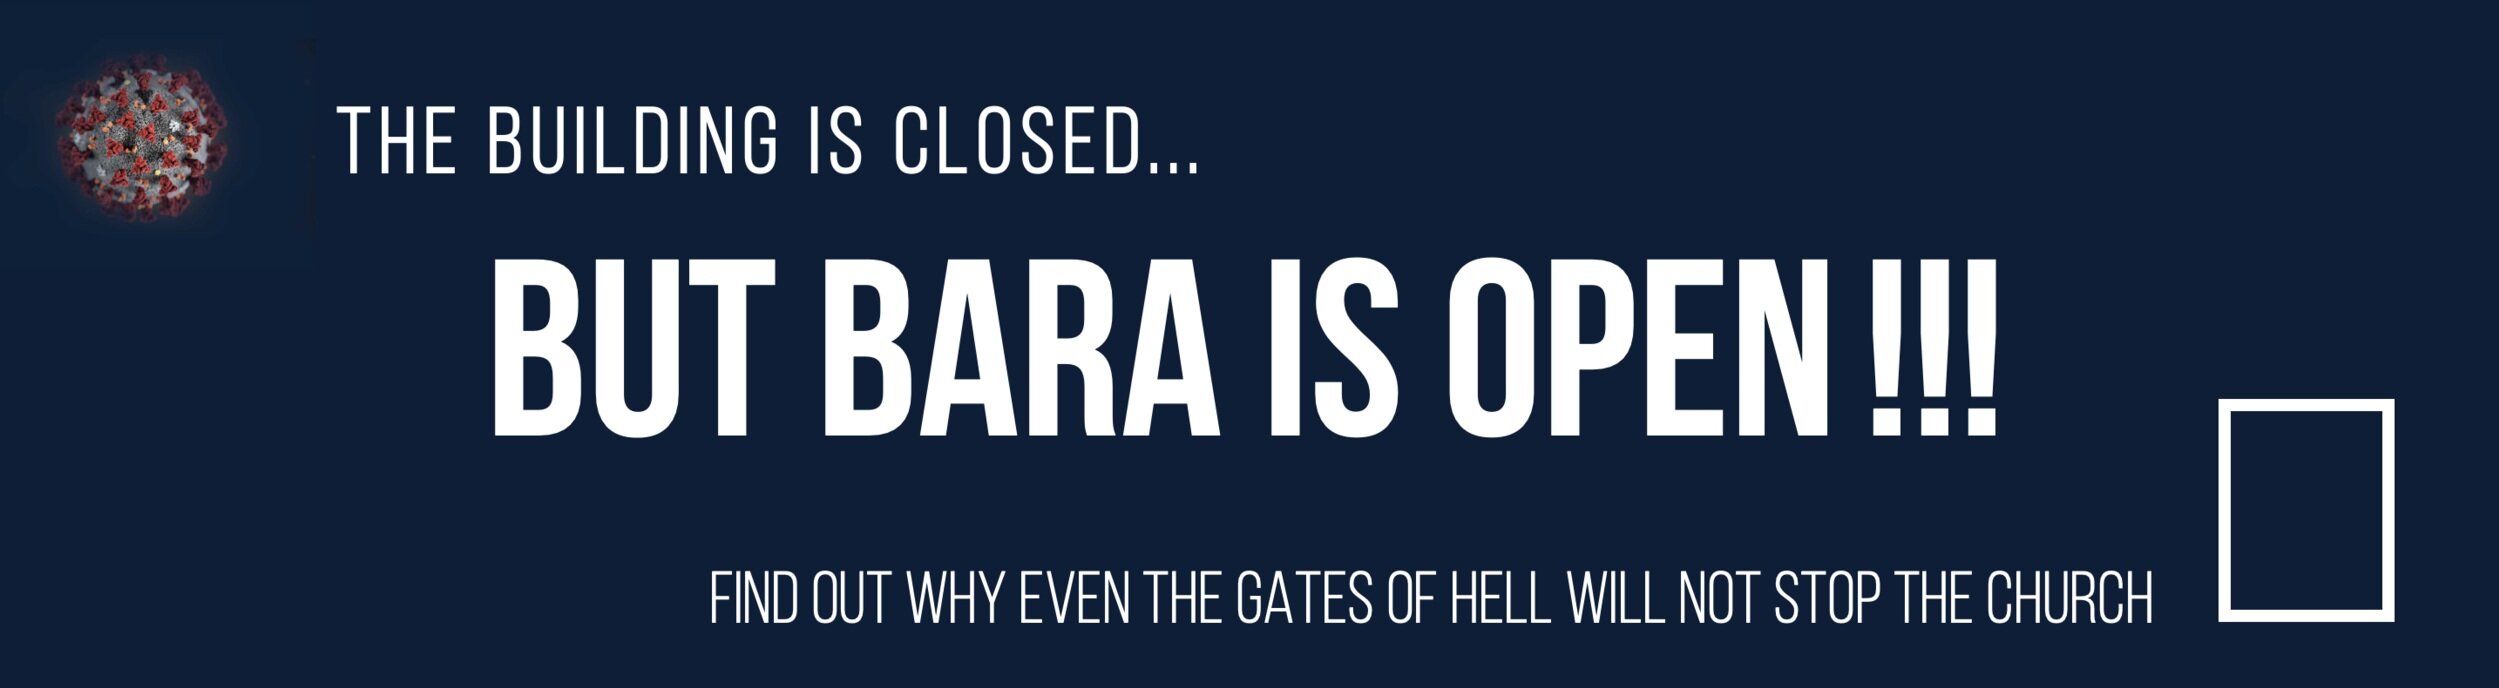 The Building is Closed But Bara is Open 2.png